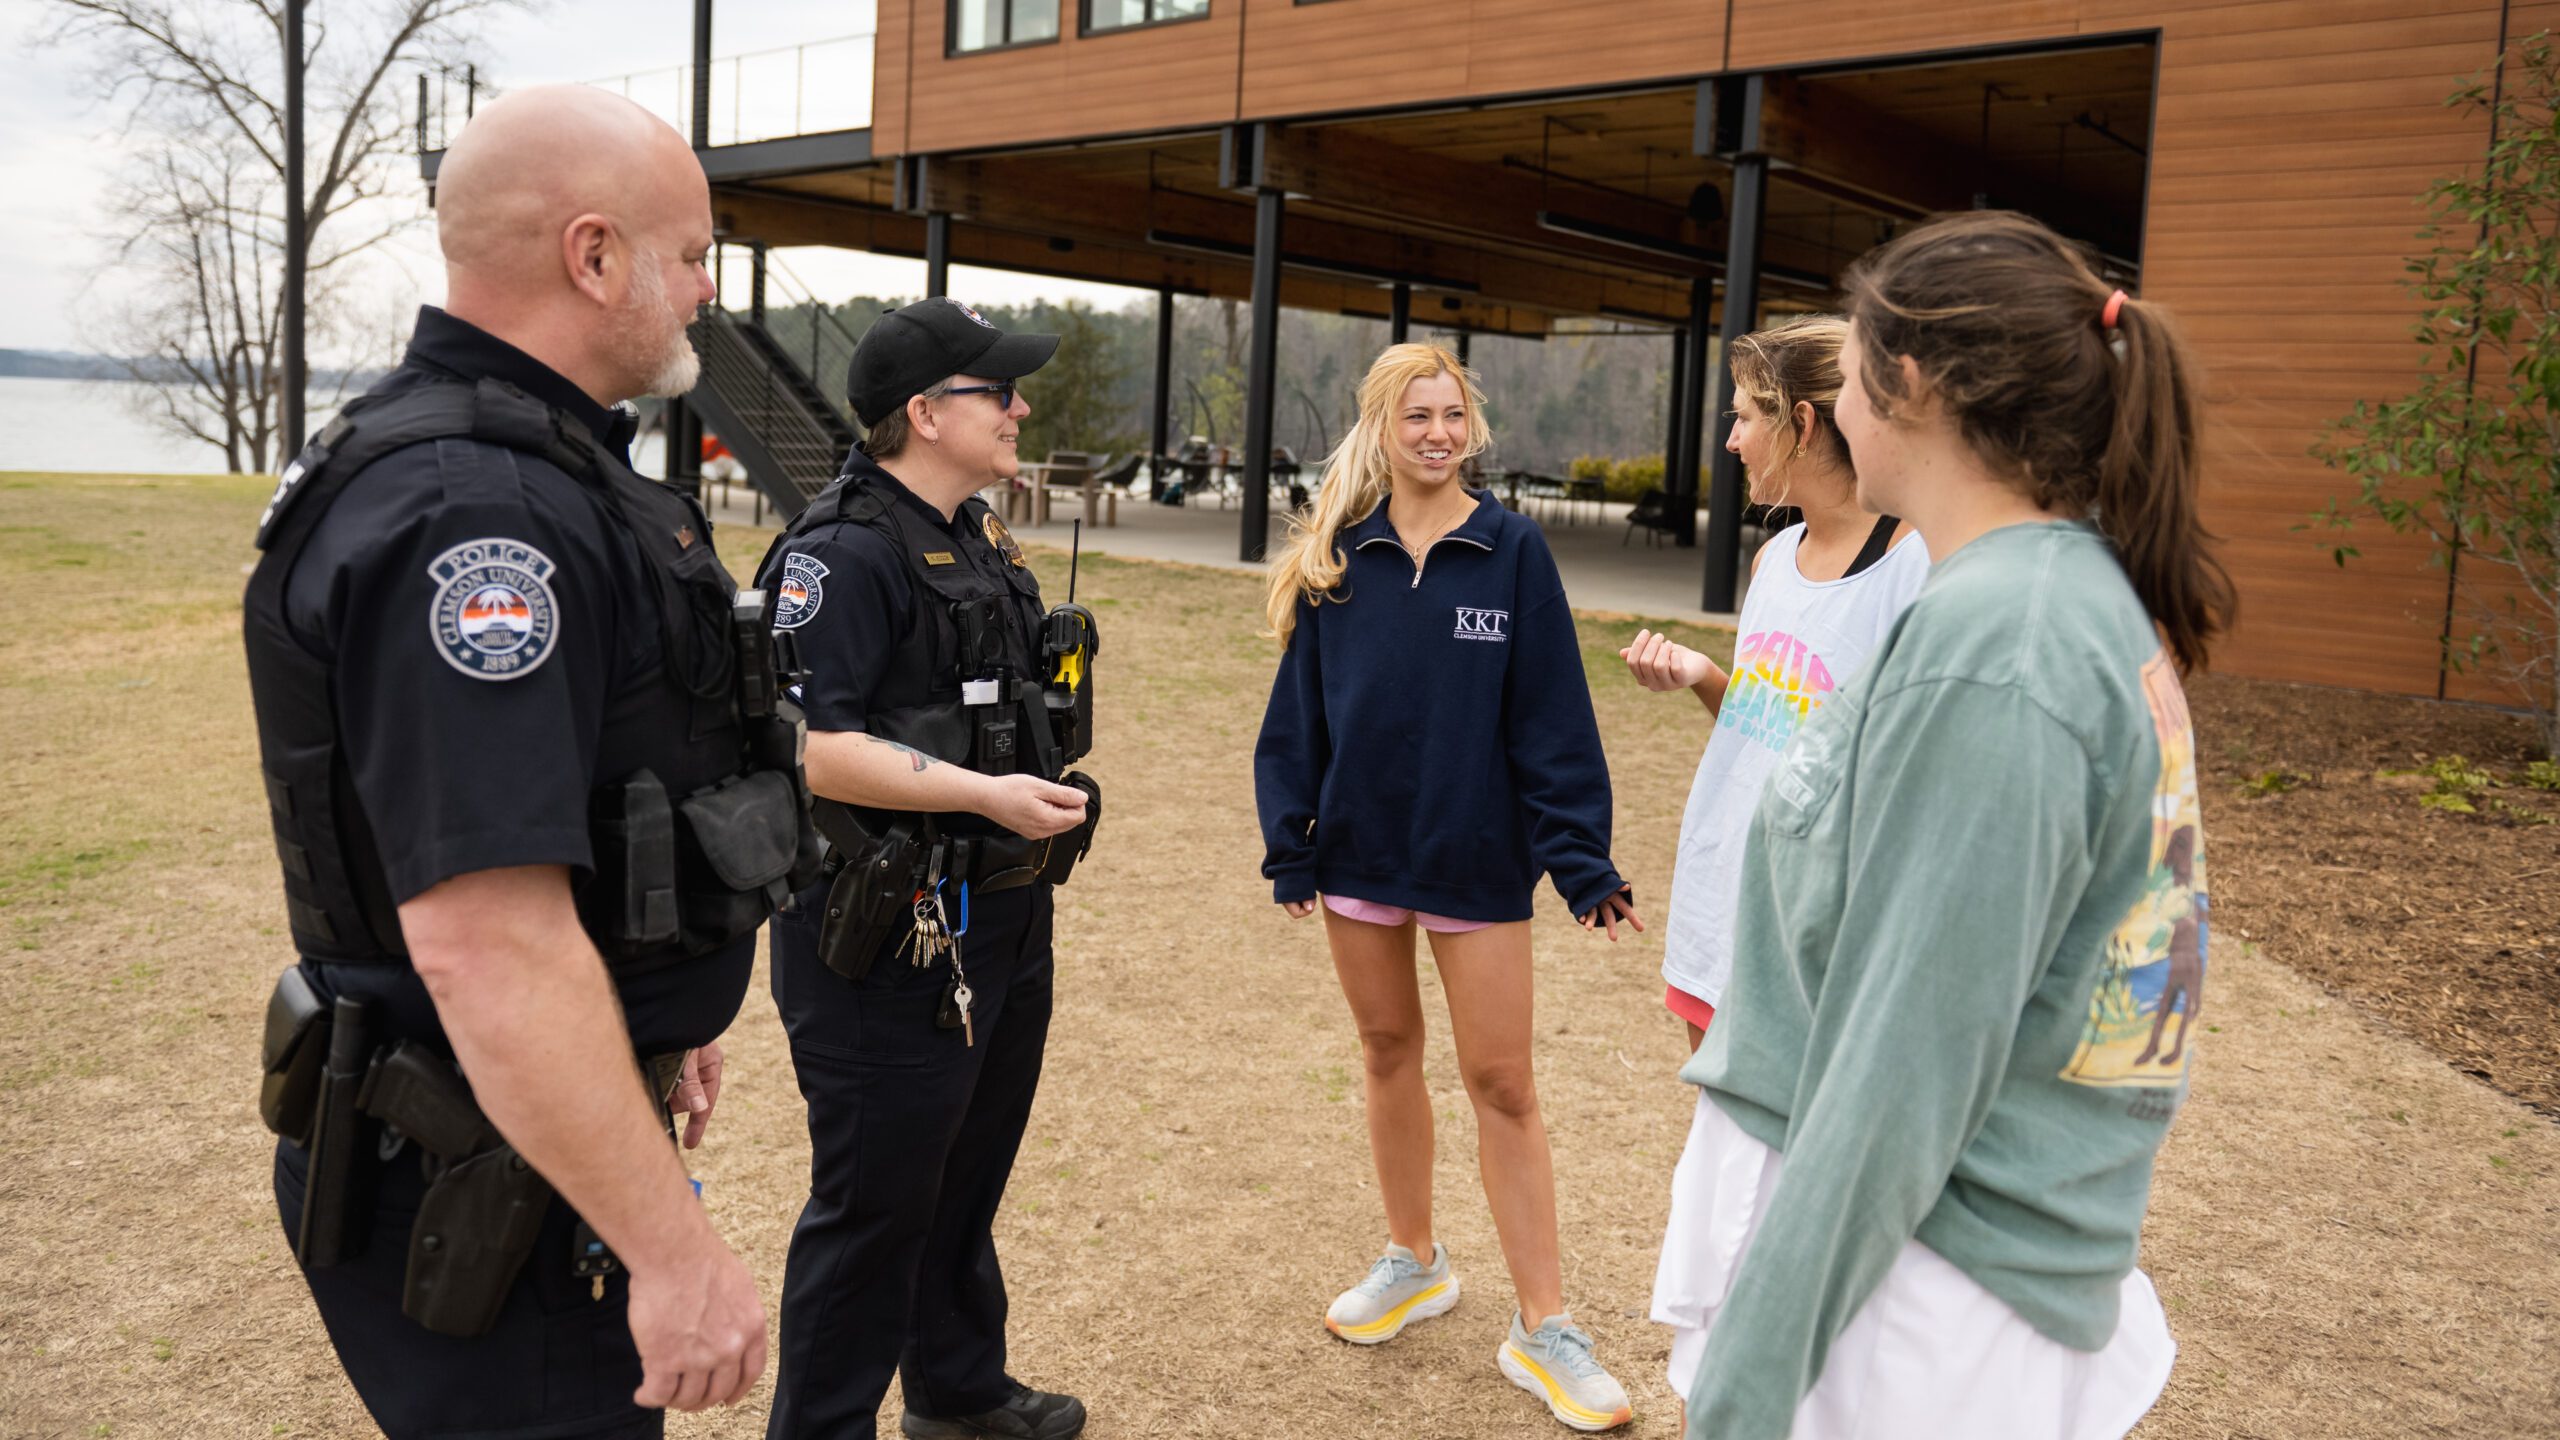 Clemson police officers speaking with three female Clemson students